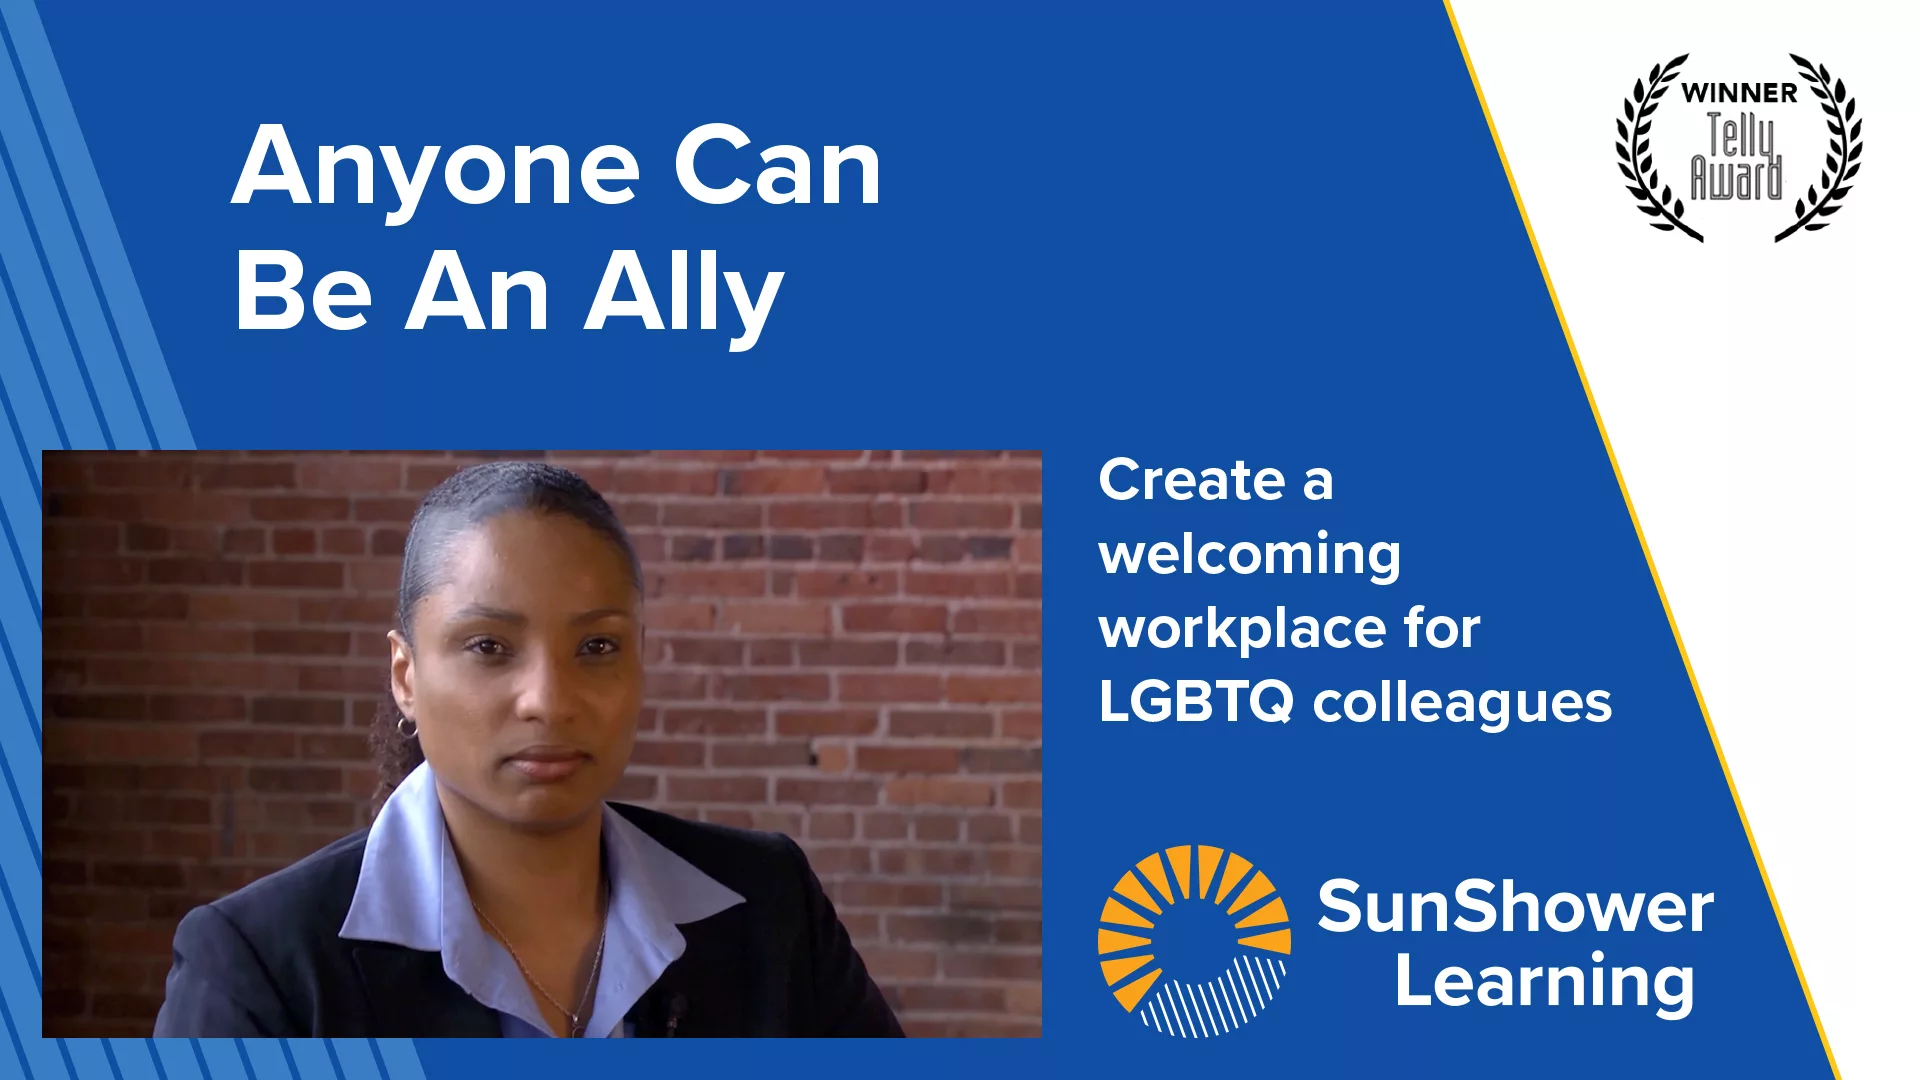 Thumbnail image with title, Anyone Can Be An Ally and text: Create a welcoming workplace for LGBTQ colleagues. Telly award seal.